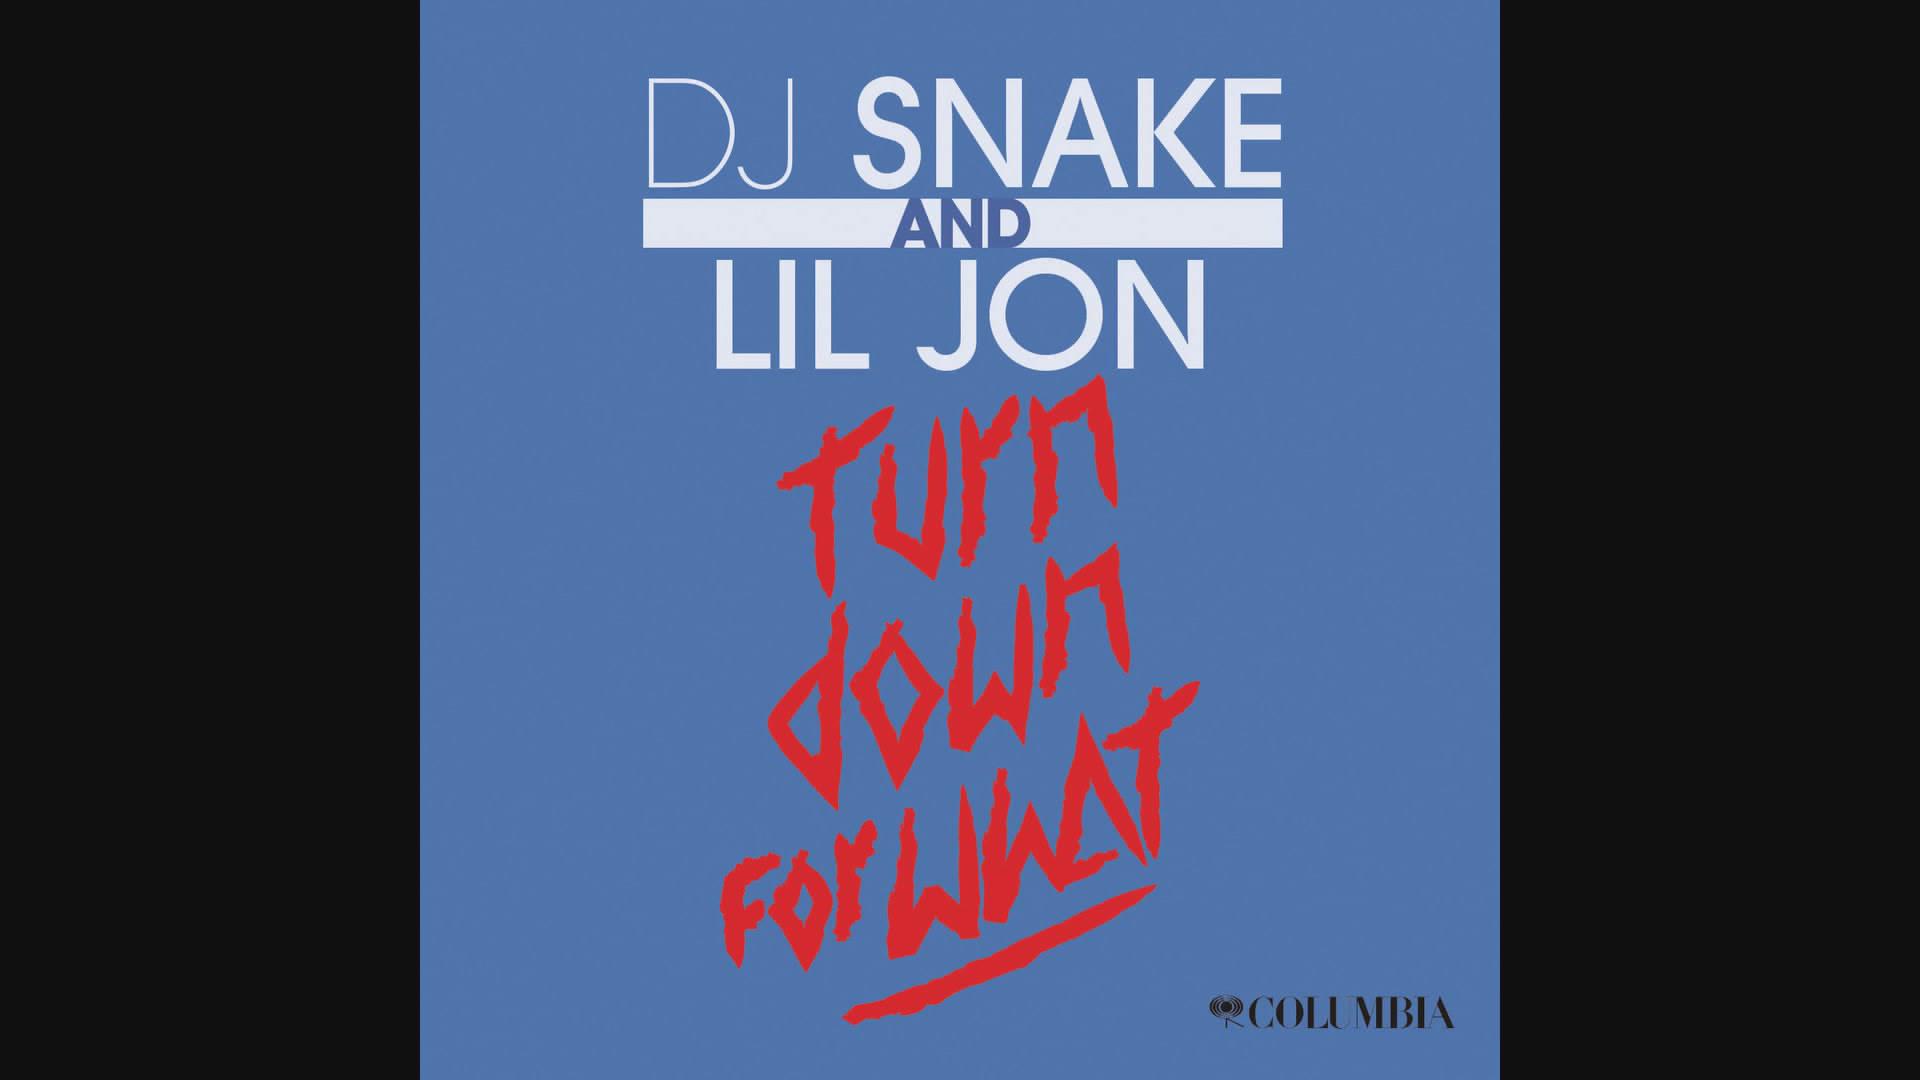 DJ Snake - Turn Down for What (Audio)